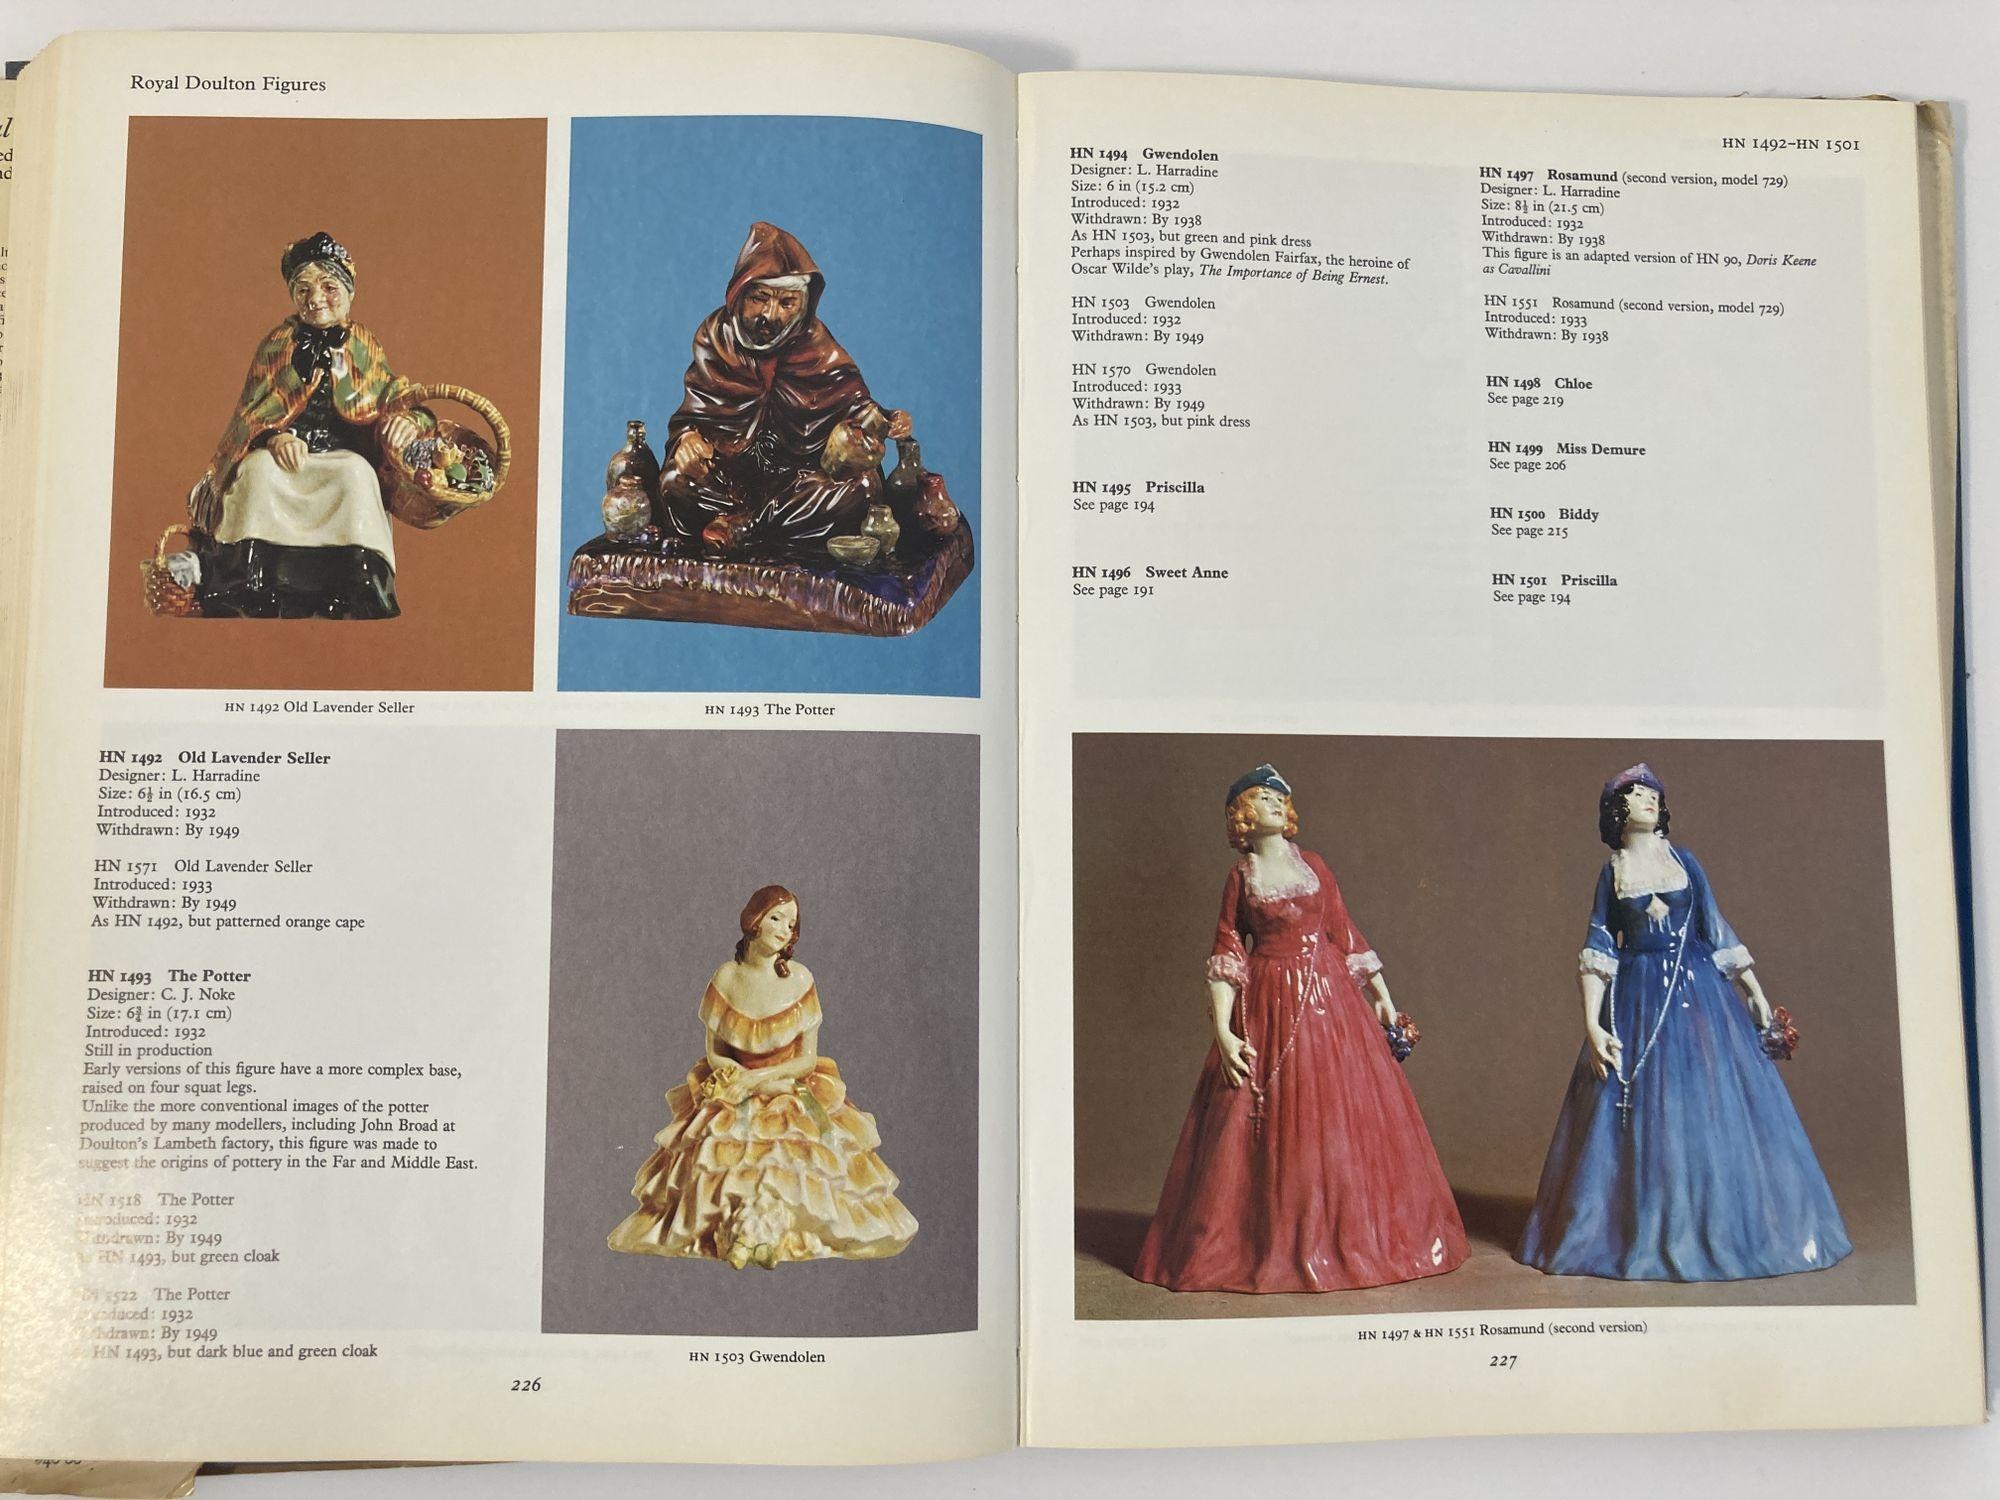 Royal Doulton Figures 1st Ed. Hardcover Book 1979 For Sale 3